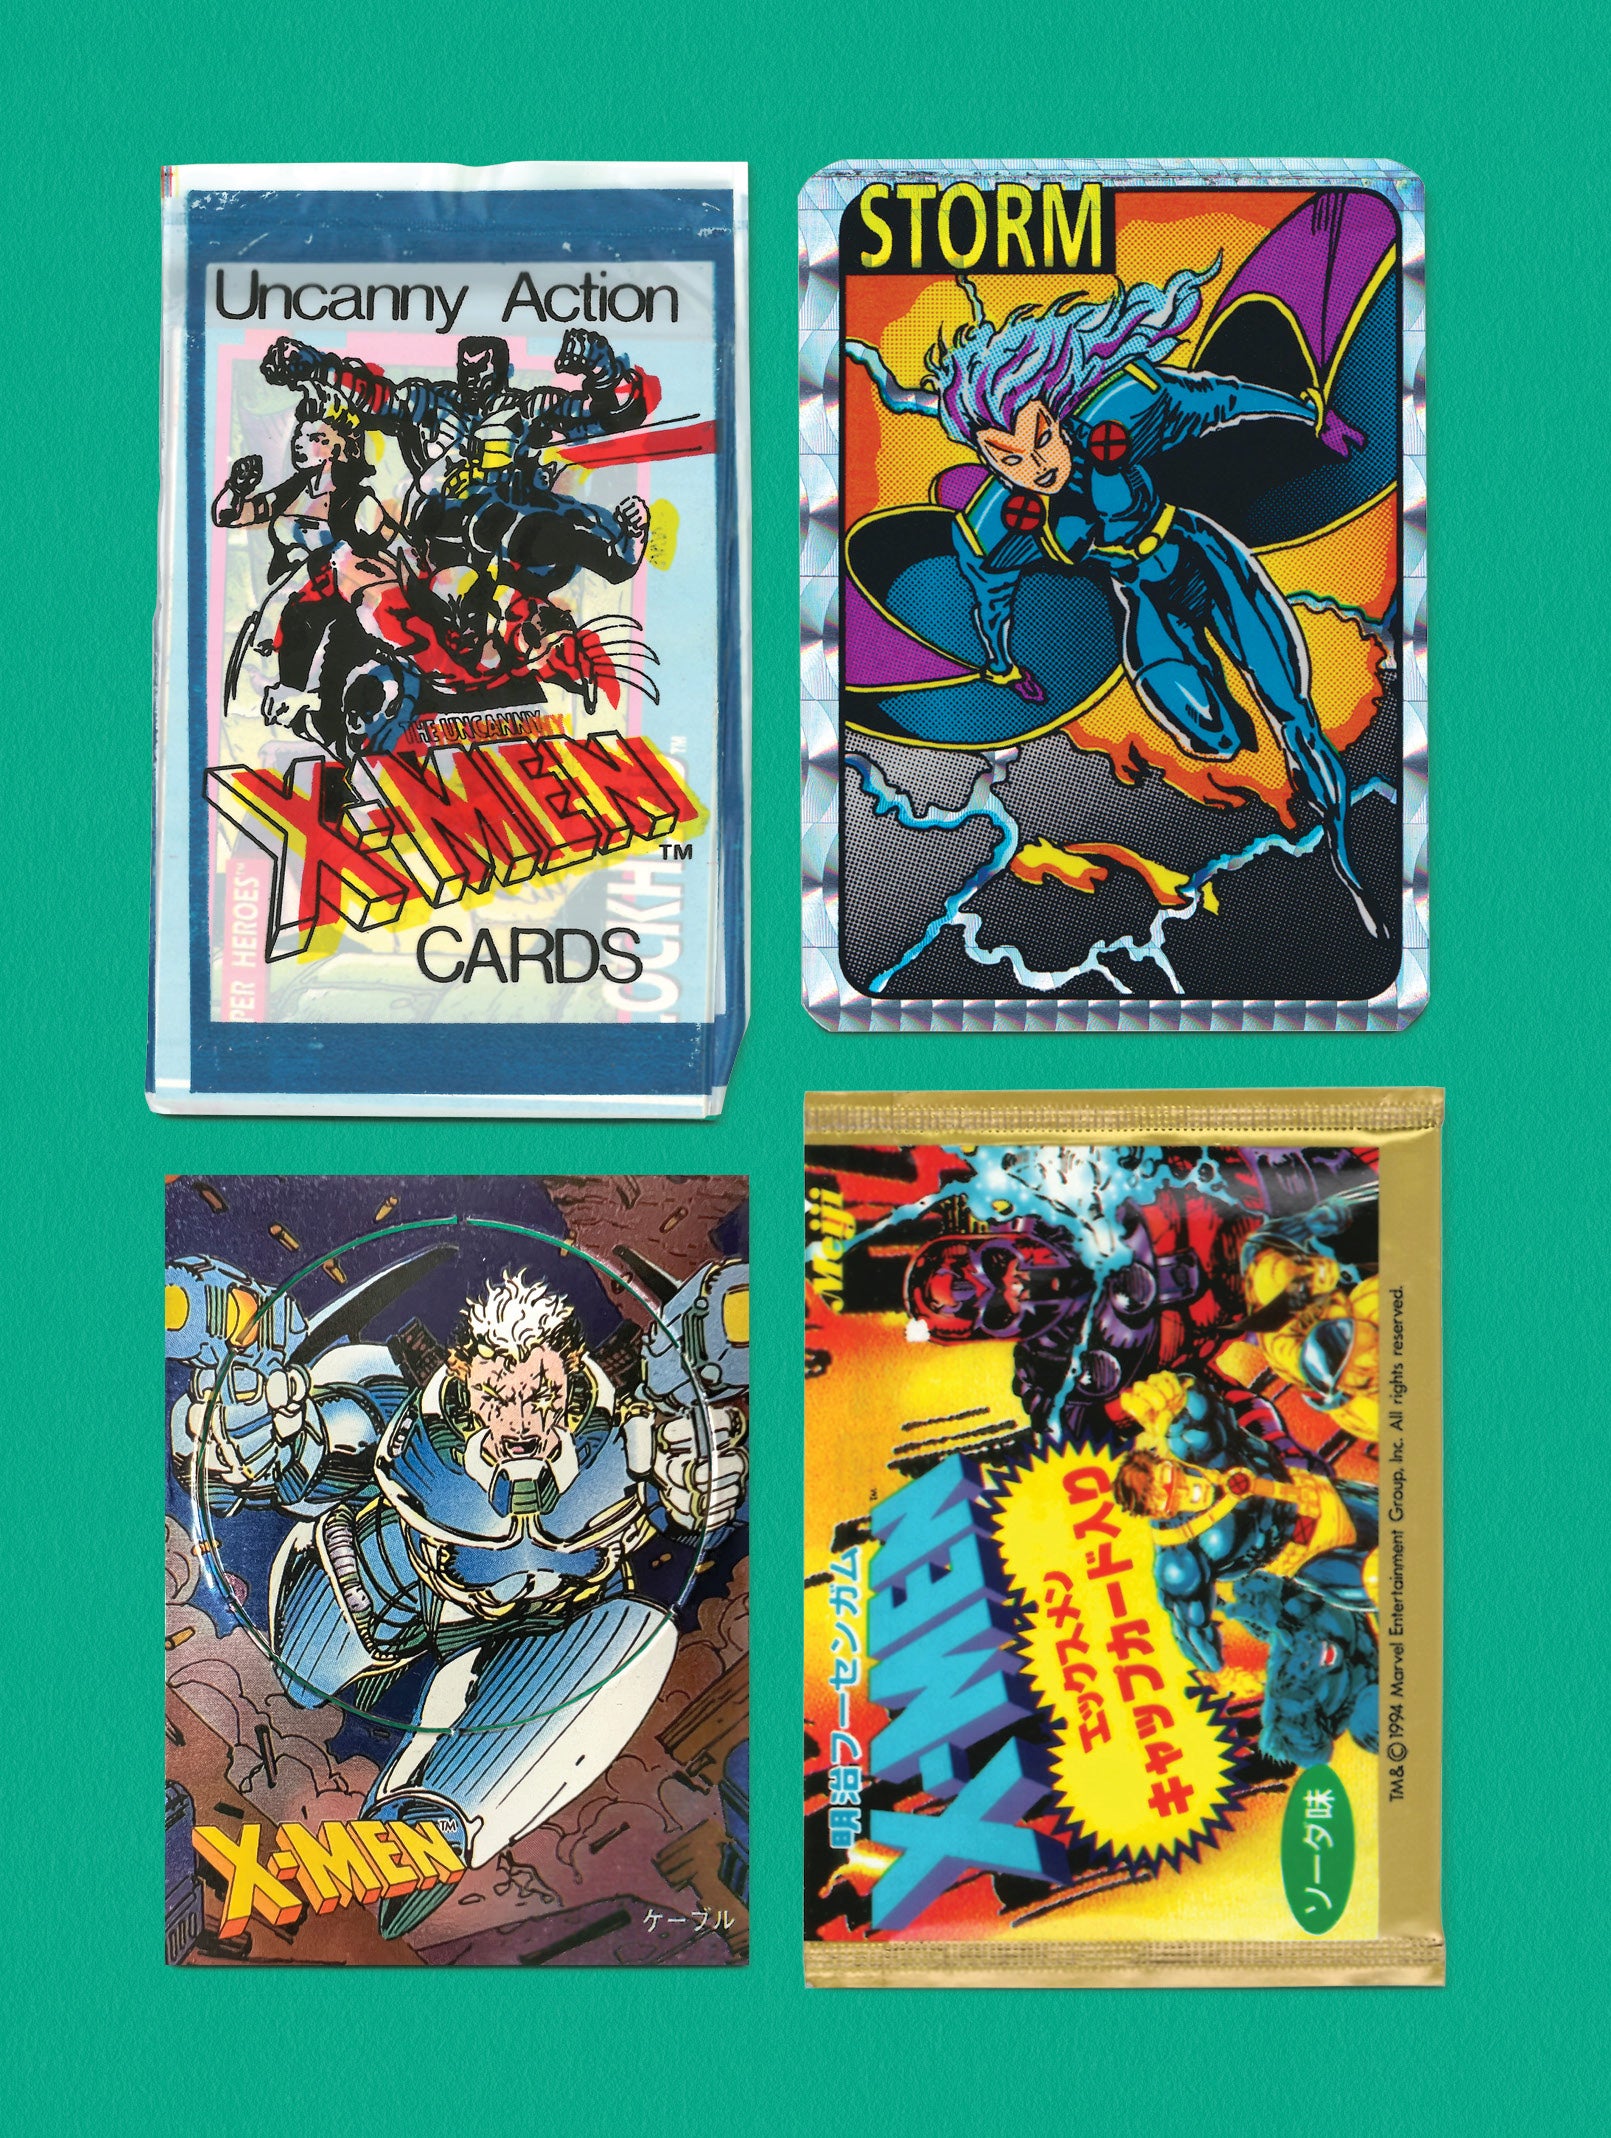 Wax pack from bootleg set produced in the Philippines. Top right: Unauthorised Prism vending-machine sticker. Bottom: Sample card/pog (left) and pack (right) from licensed set produced in Japan by Meiji. (Image: © 2022 MARVEL)